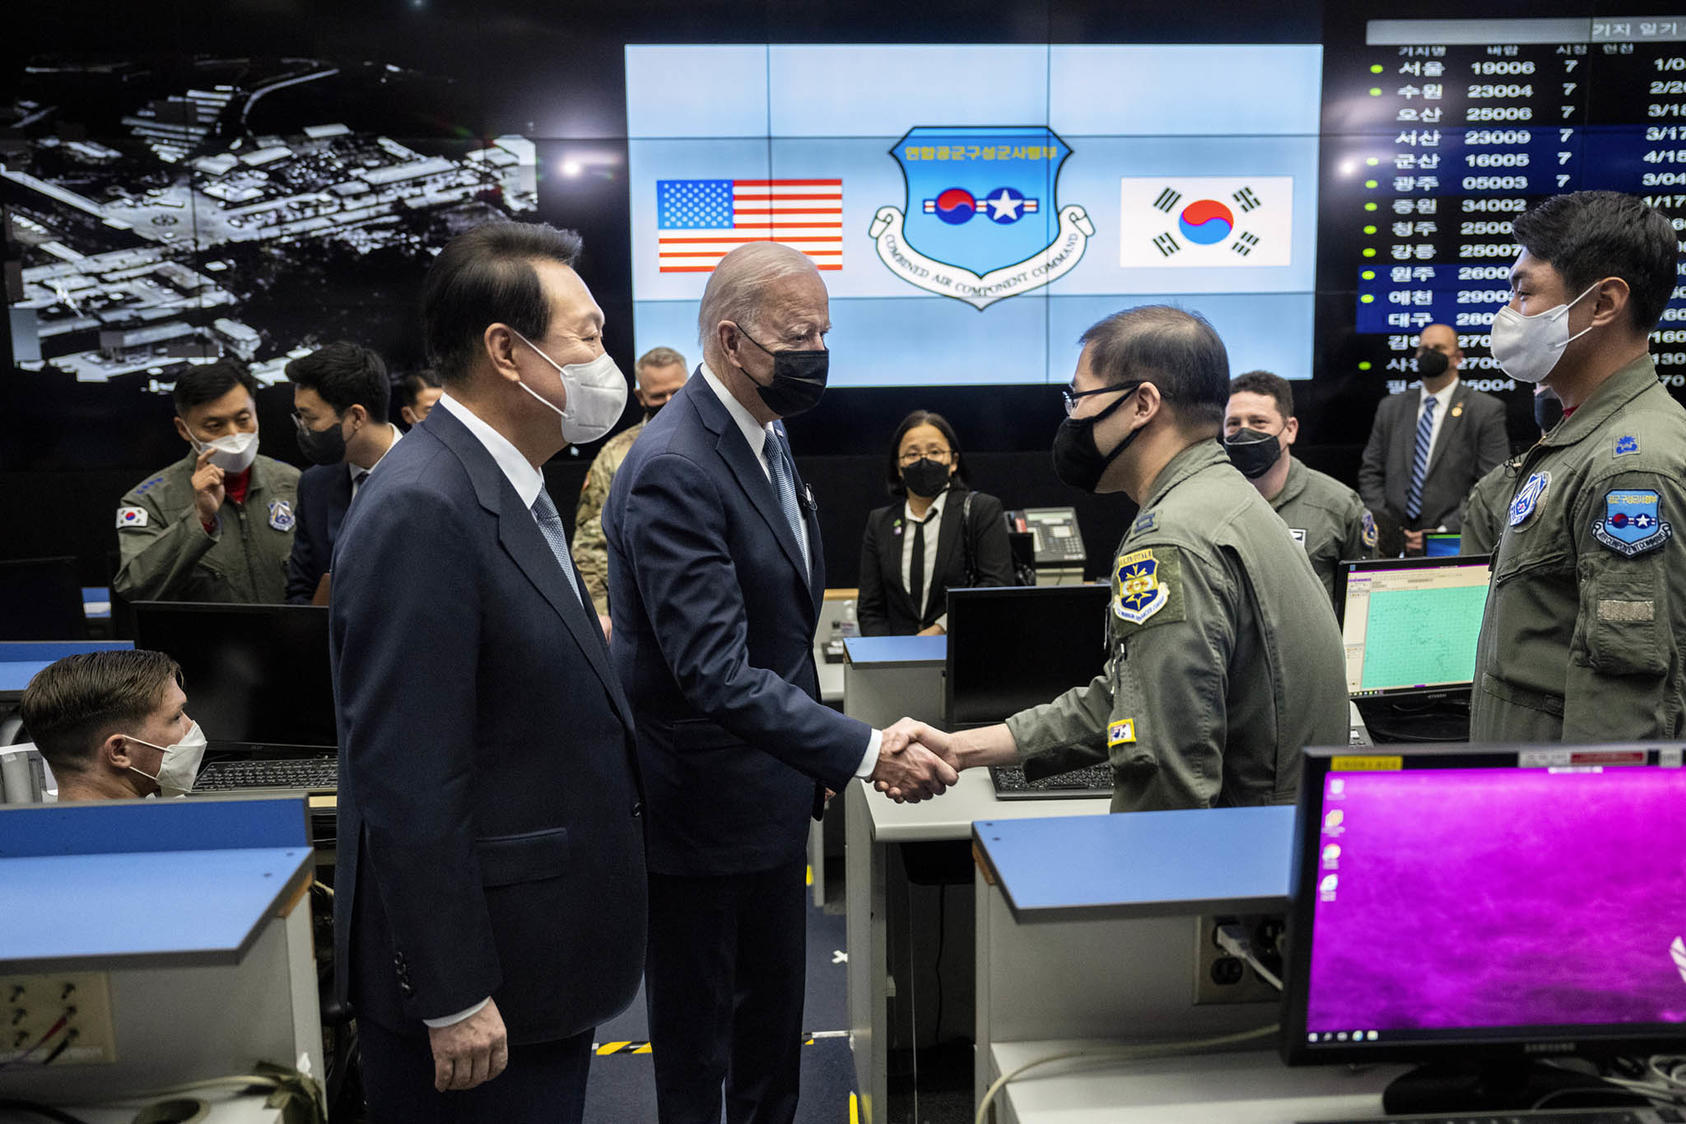 President Joe Biden and South Korean President Yoon Suk Yeol during a visit of the Air Operations Center on Osan Air Base in South Korea. October 19, 2022. (Doug Mills/The New York Times)